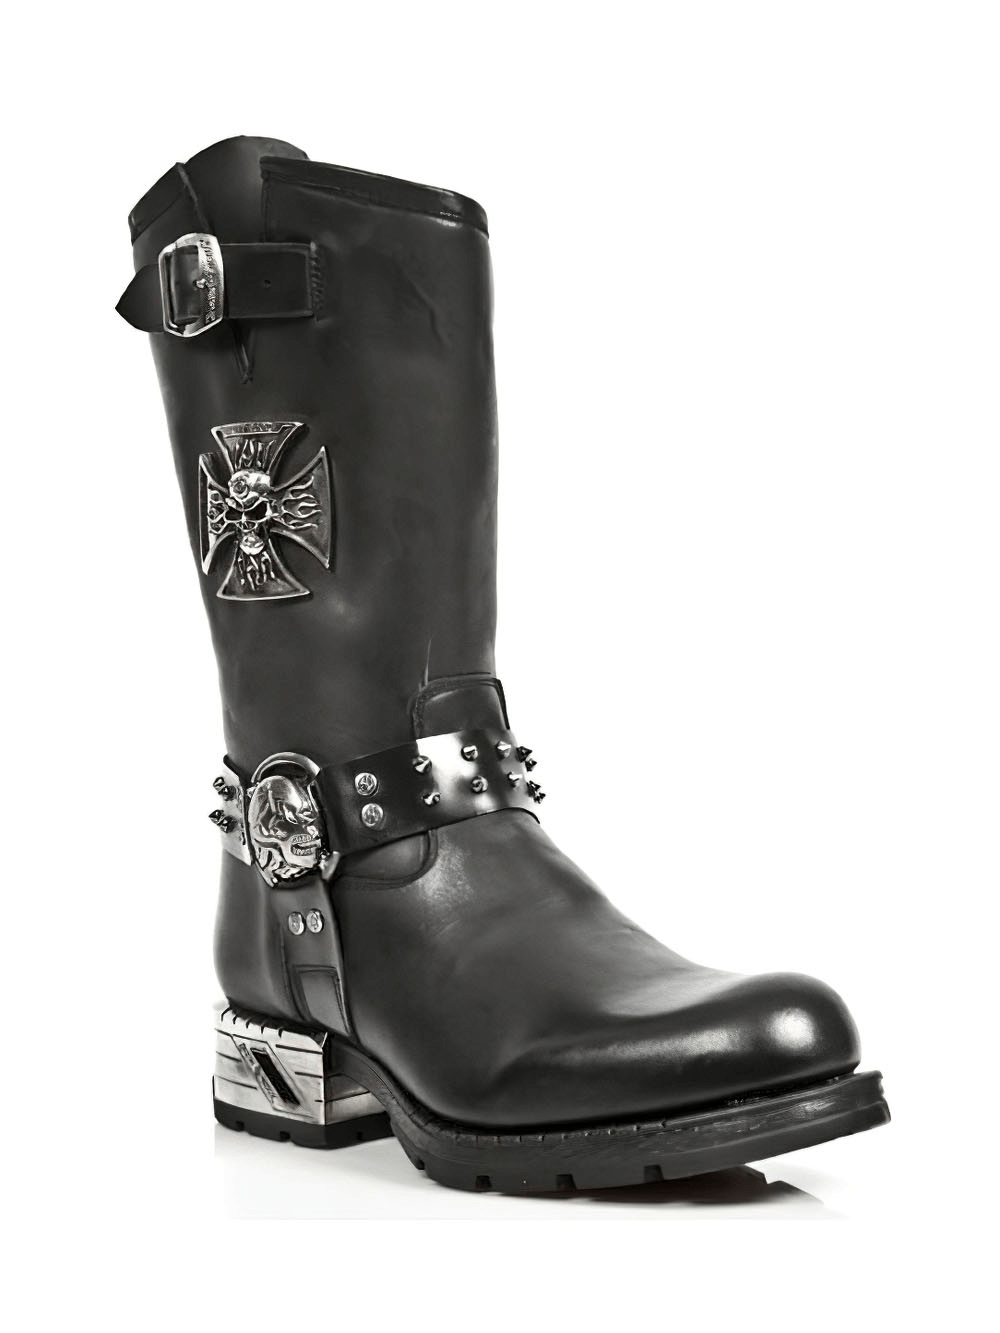 NEW ROCK Gothic Leather Boots with Metallic Embellishments